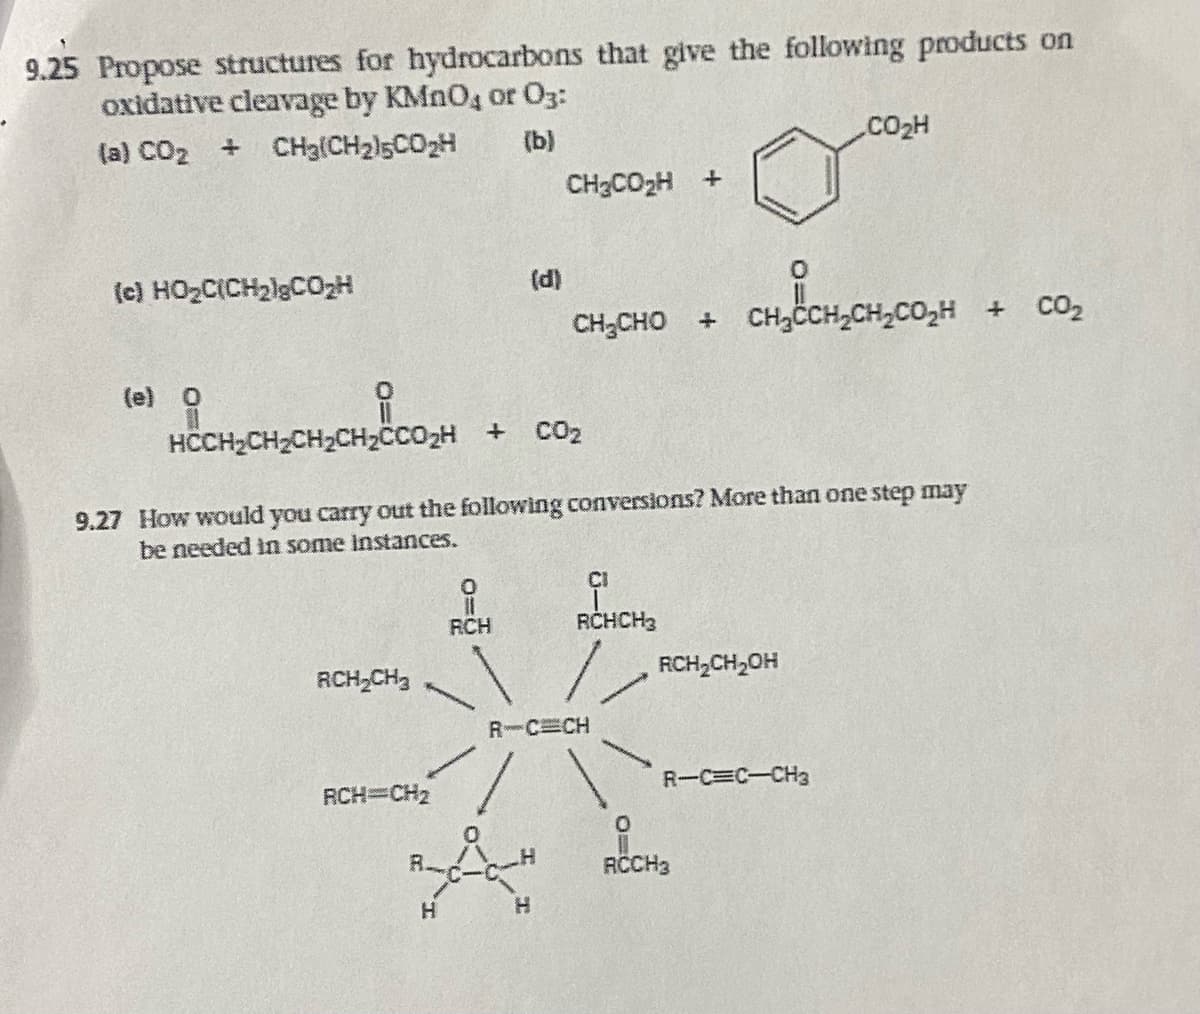 9.25 Propose structures for hydrocarbons that give the following products on
oxidative cleavage by KMnO, or 03:
{a} COz + CH3CHz5COz4
(b)
(e} HO,CiCHzlgCOzH
(e) O
RCH₂CH₂
RCH=CH₂
HCCH₂CH₂CH₂CH₂CC0₂H + CO₂
9.27 How would you carry out the following conversions? More than one step may
be needed in some instances.
RCH
CH3COzH+
(d)
CH₂CH₂C
CH, CHO + CHCCH, CH, COH + CO2
H
RCHCH3
R-C CH
RCH₂CH₂OH
CO₂H
R-C=C-CH3
O
RCCH3